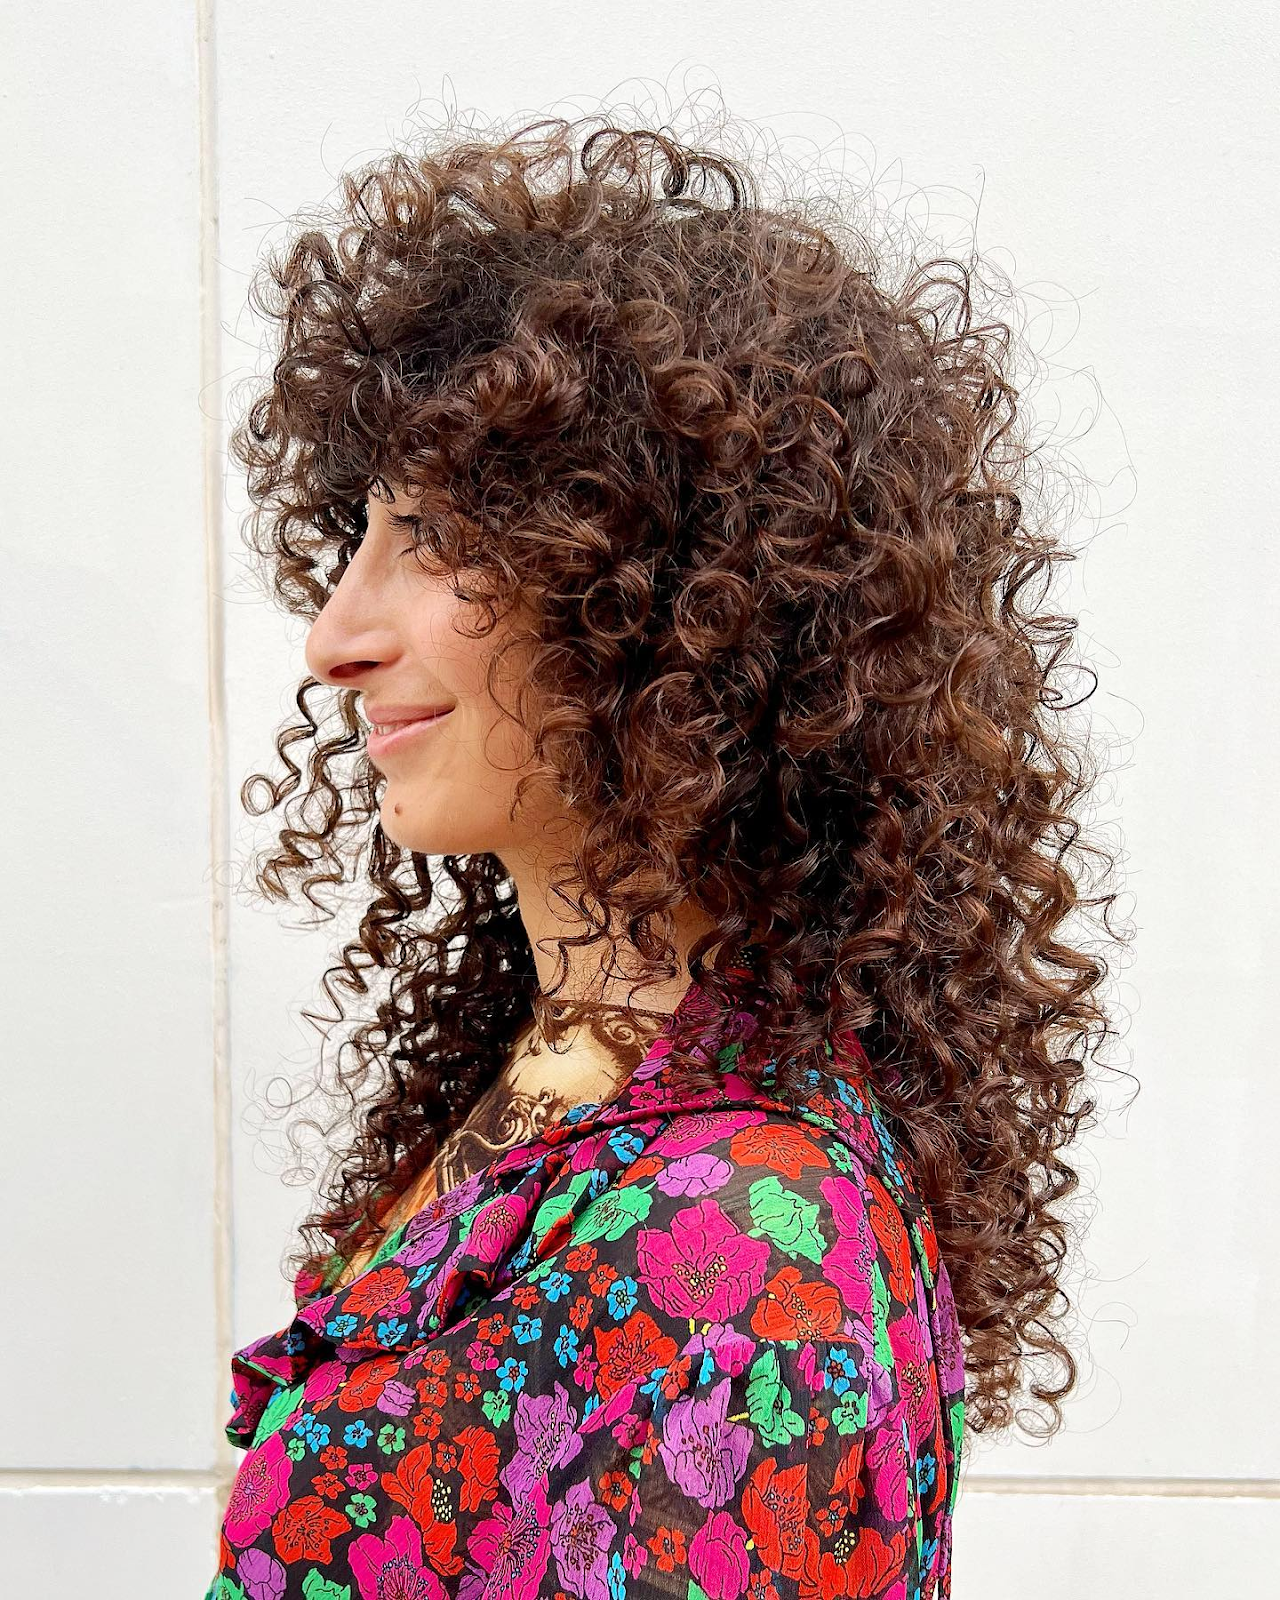 Gorgeous Curly Shaggy Hairstyle